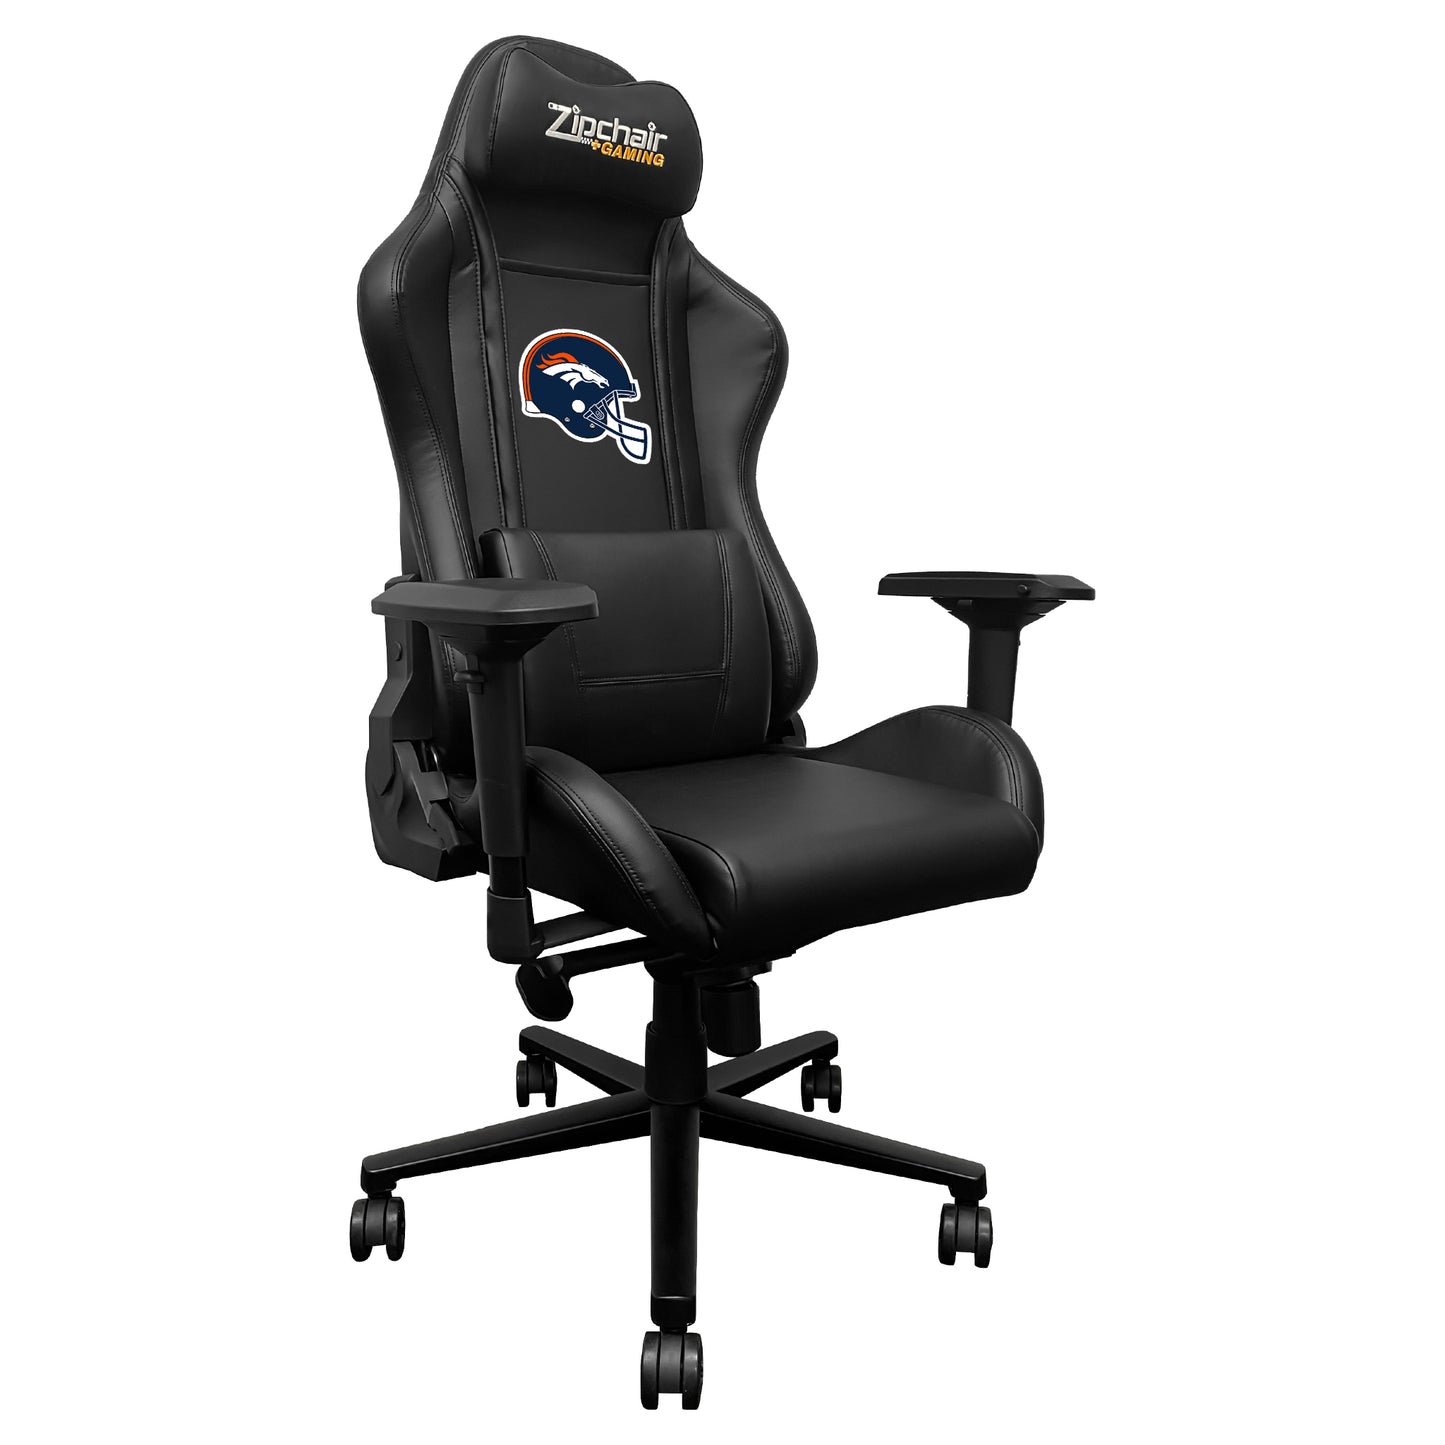 Xpression Pro Gaming Chair with  Denver Broncos Helmet Logo